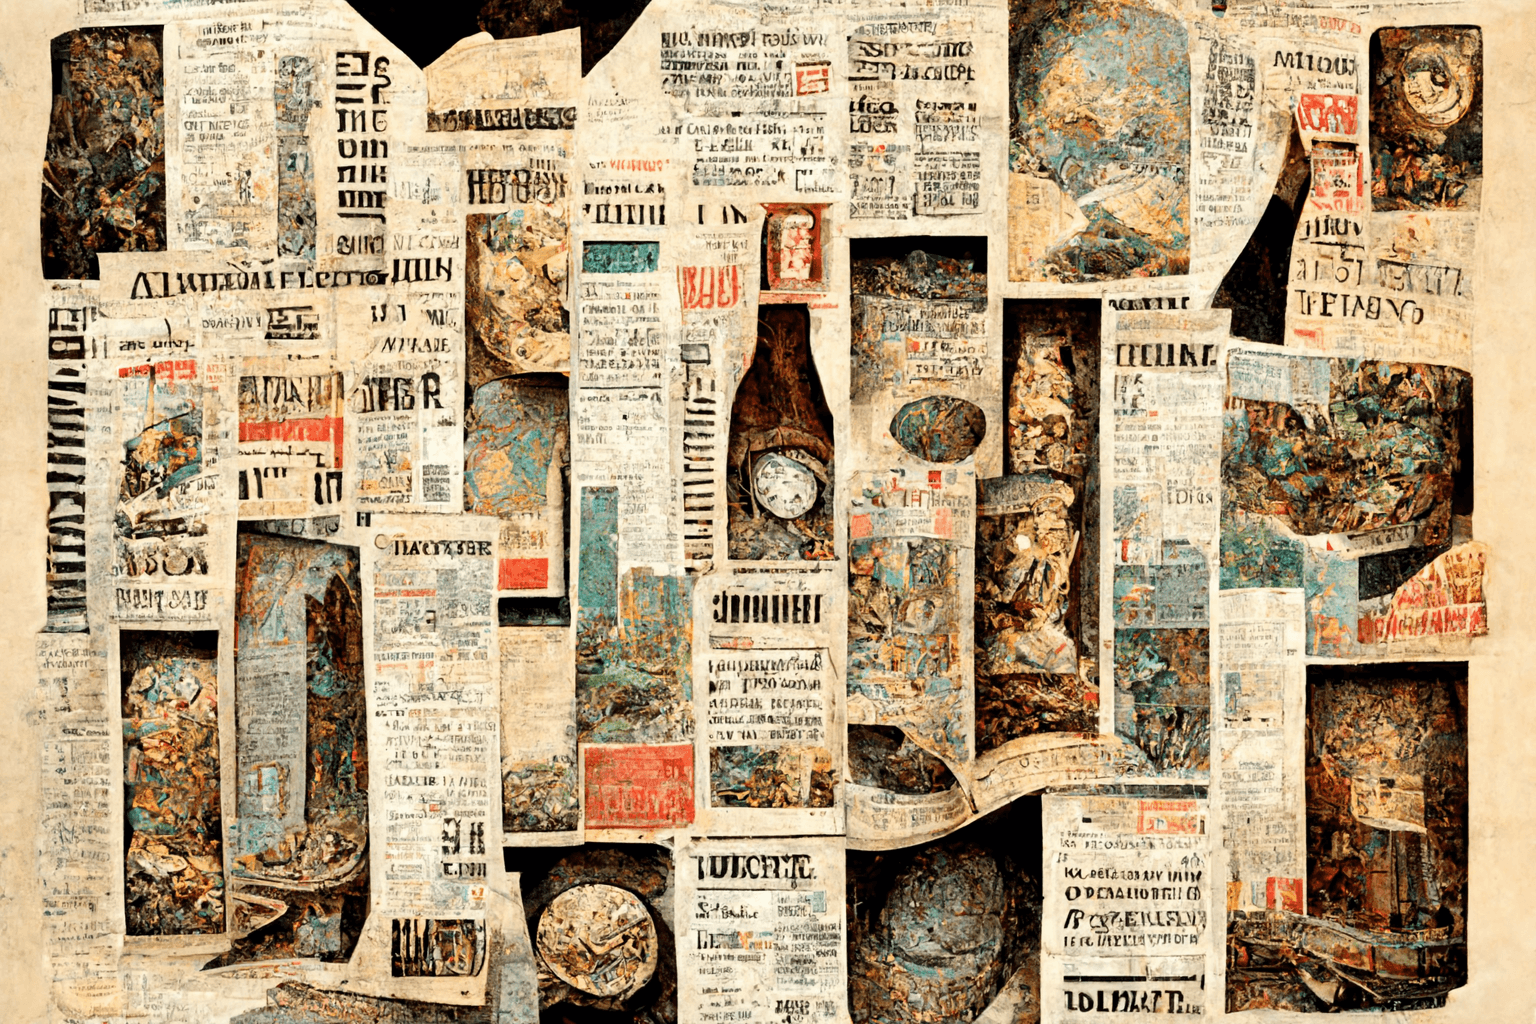 Newspaper Vintage Old Aged Texture Graphic by Hr-Graphics · Creative Fabrica